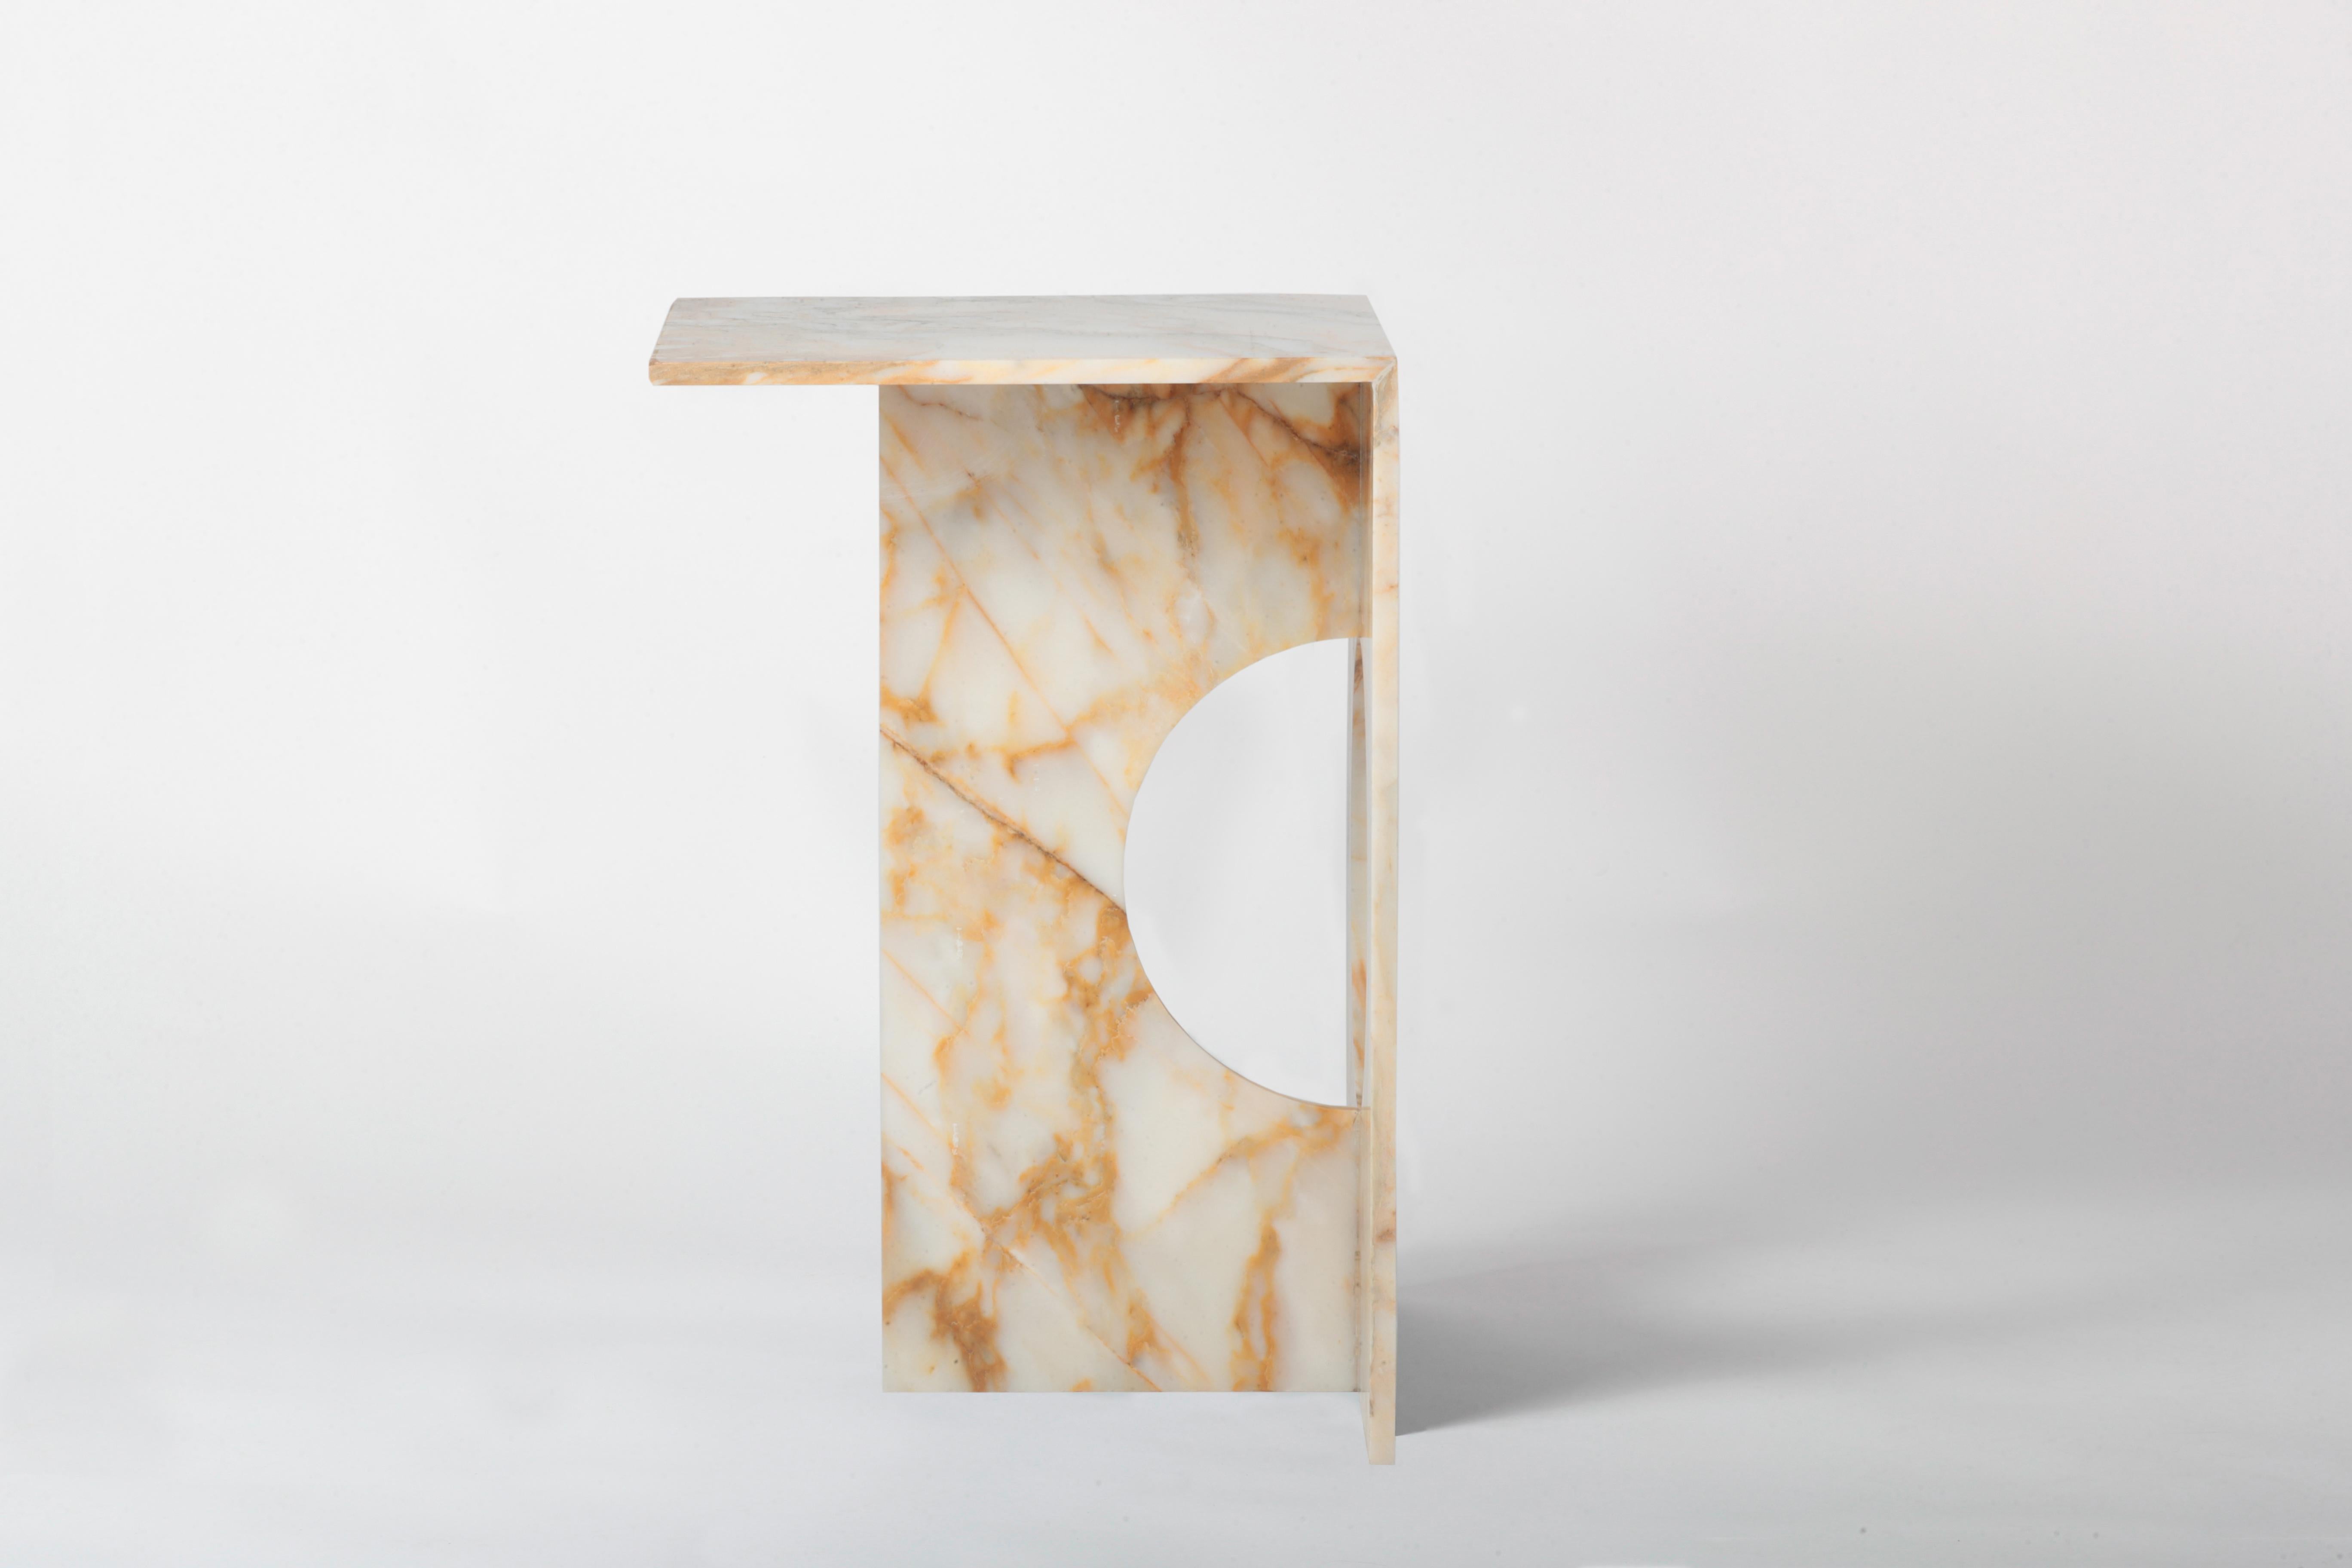 A side table made entirely from marble makes this piece like a modern sculpture. Ola side table can be made from diffferent marbles or green diabase stone if required. Perfection of machine cut blends with handmade touches at the finishes in this